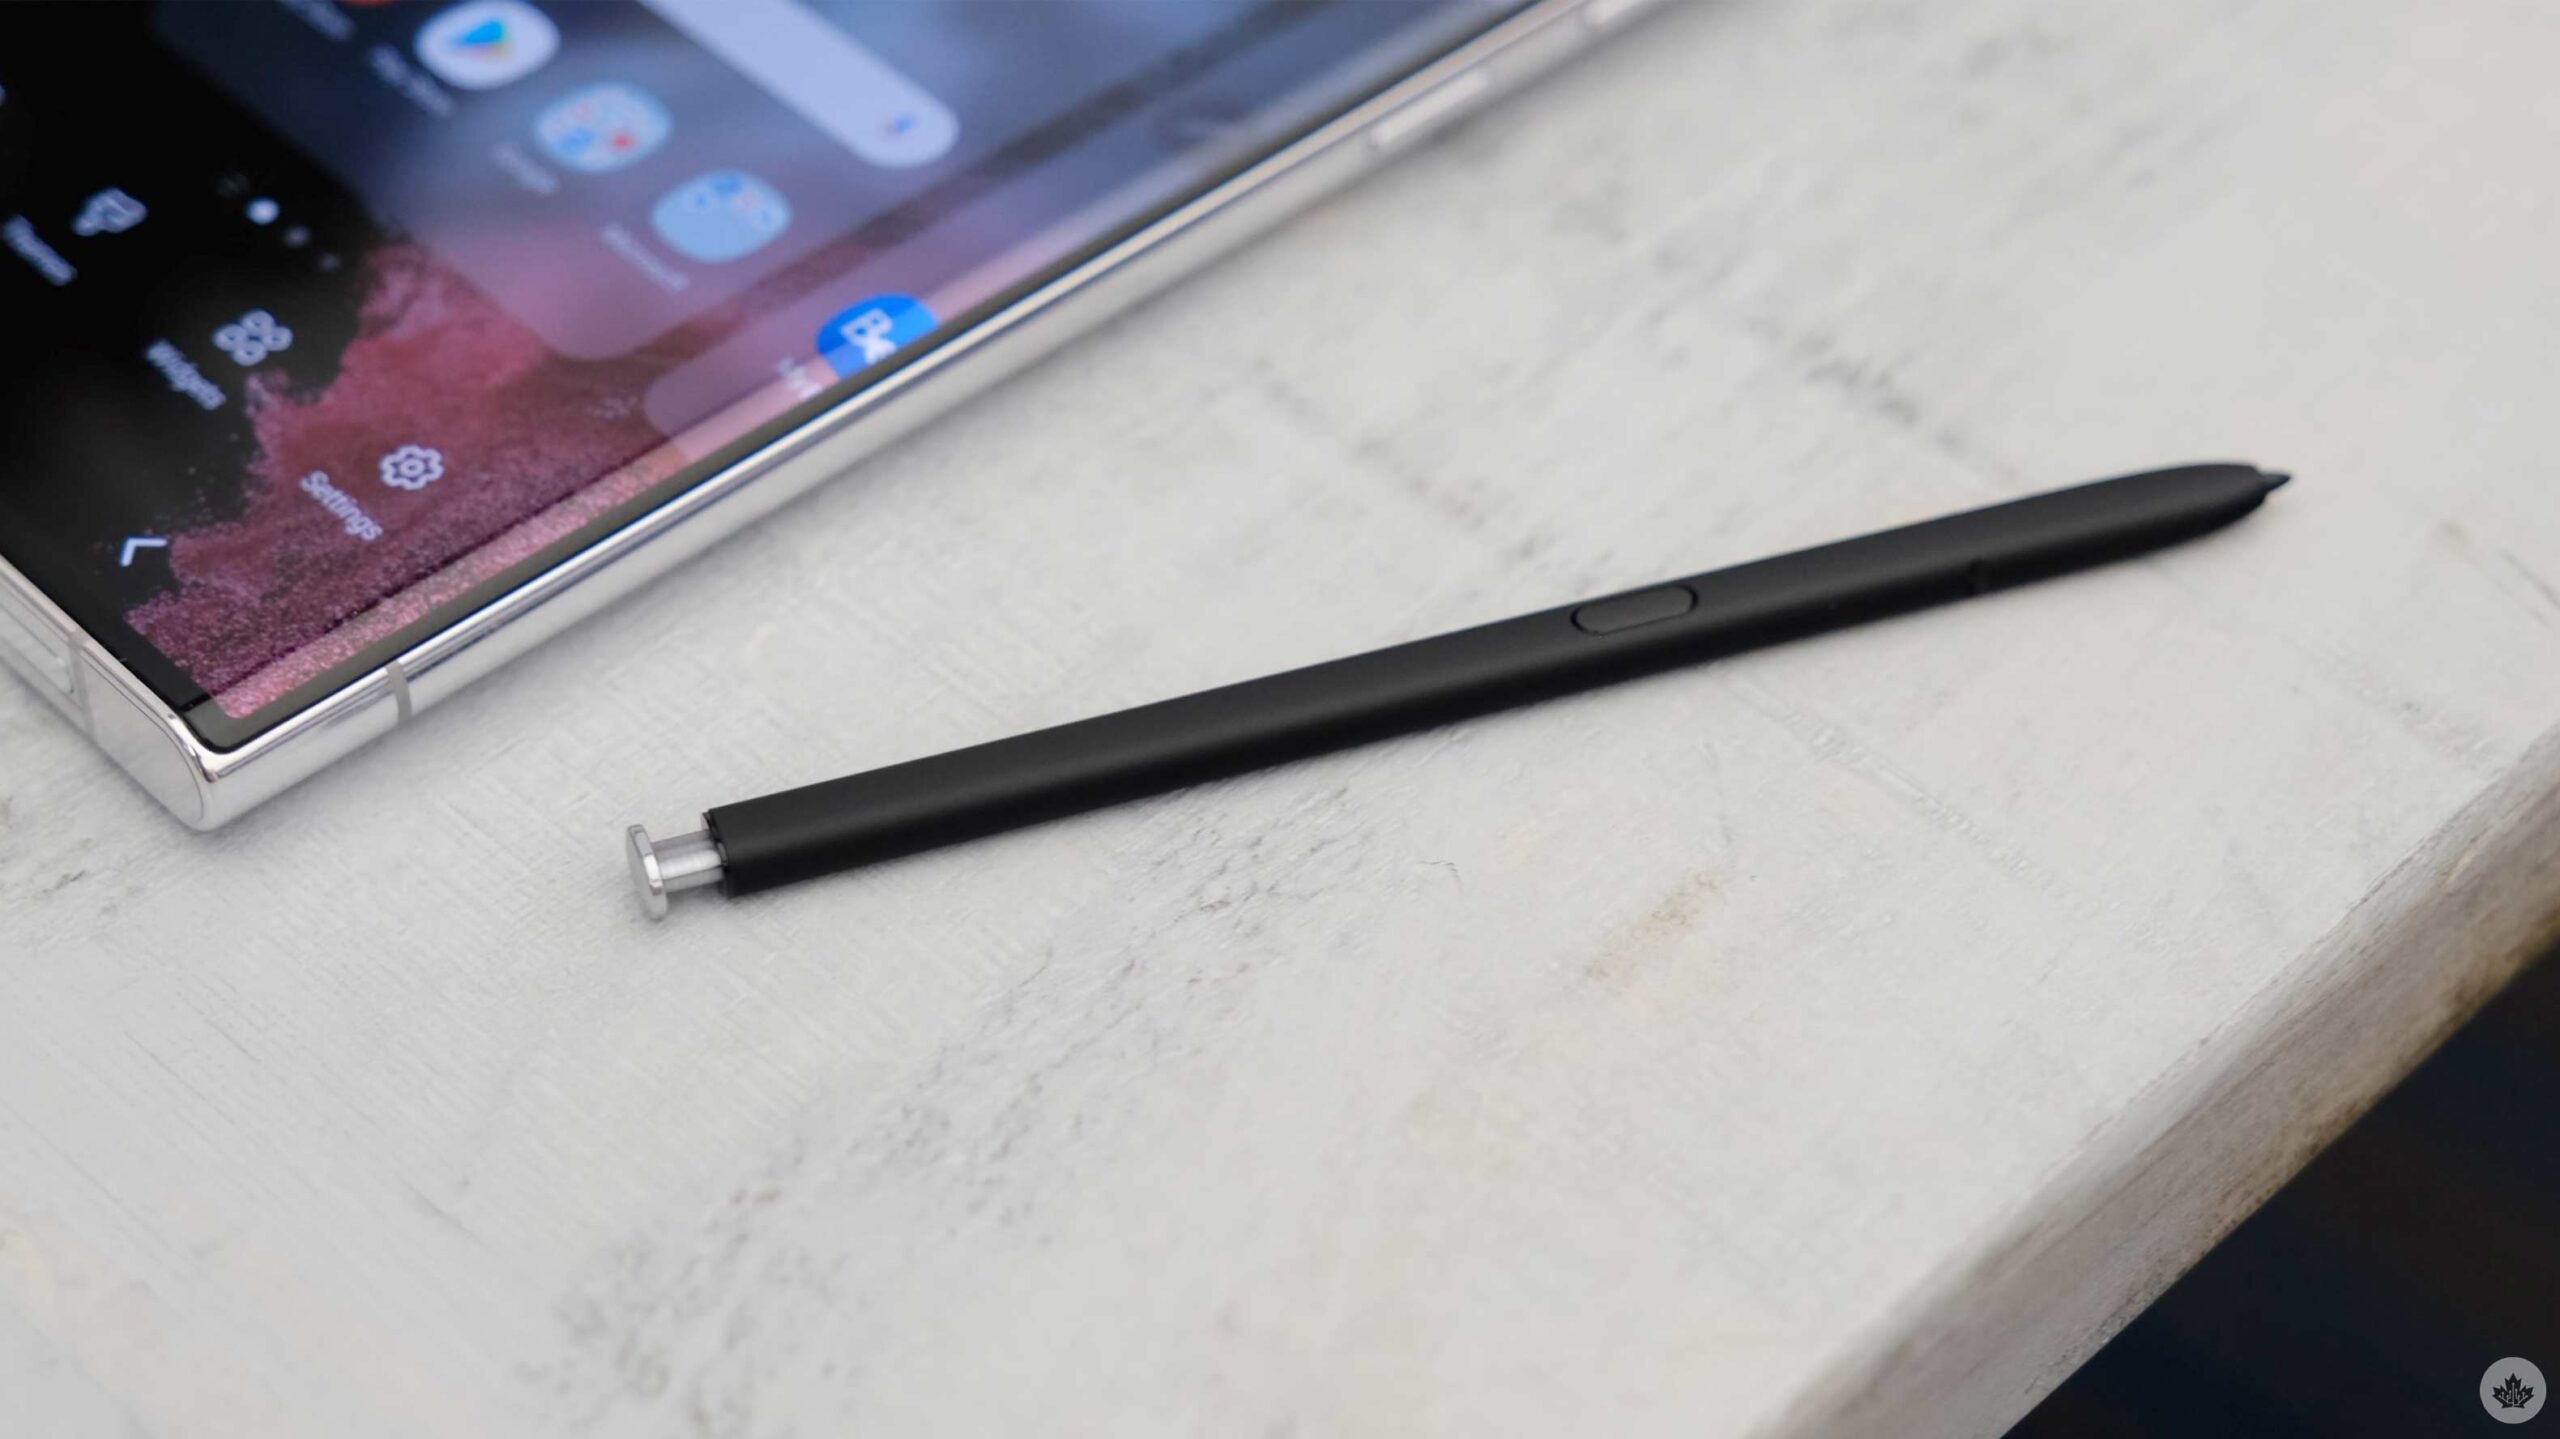 What do you use your smartphone’s stylus for? thumbnail